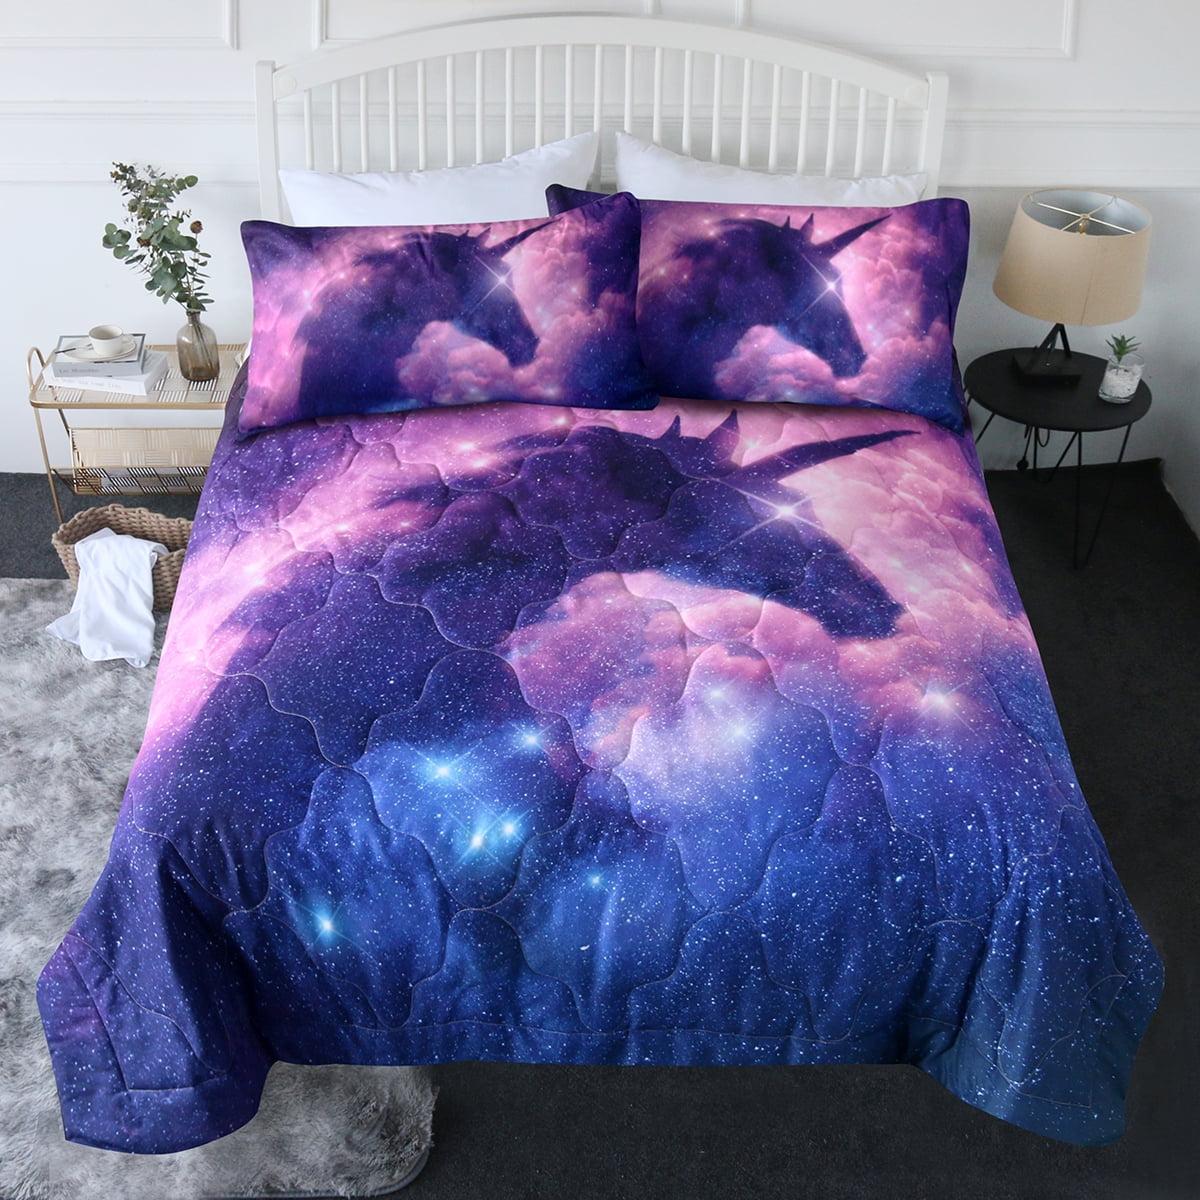 Twin BlessLiving Galaxy Unicorn Bedding Kids Girls Psychedelic Space Duvet Cover 3 Piece Pink Purple Sparkly Unicorn Bedspread 